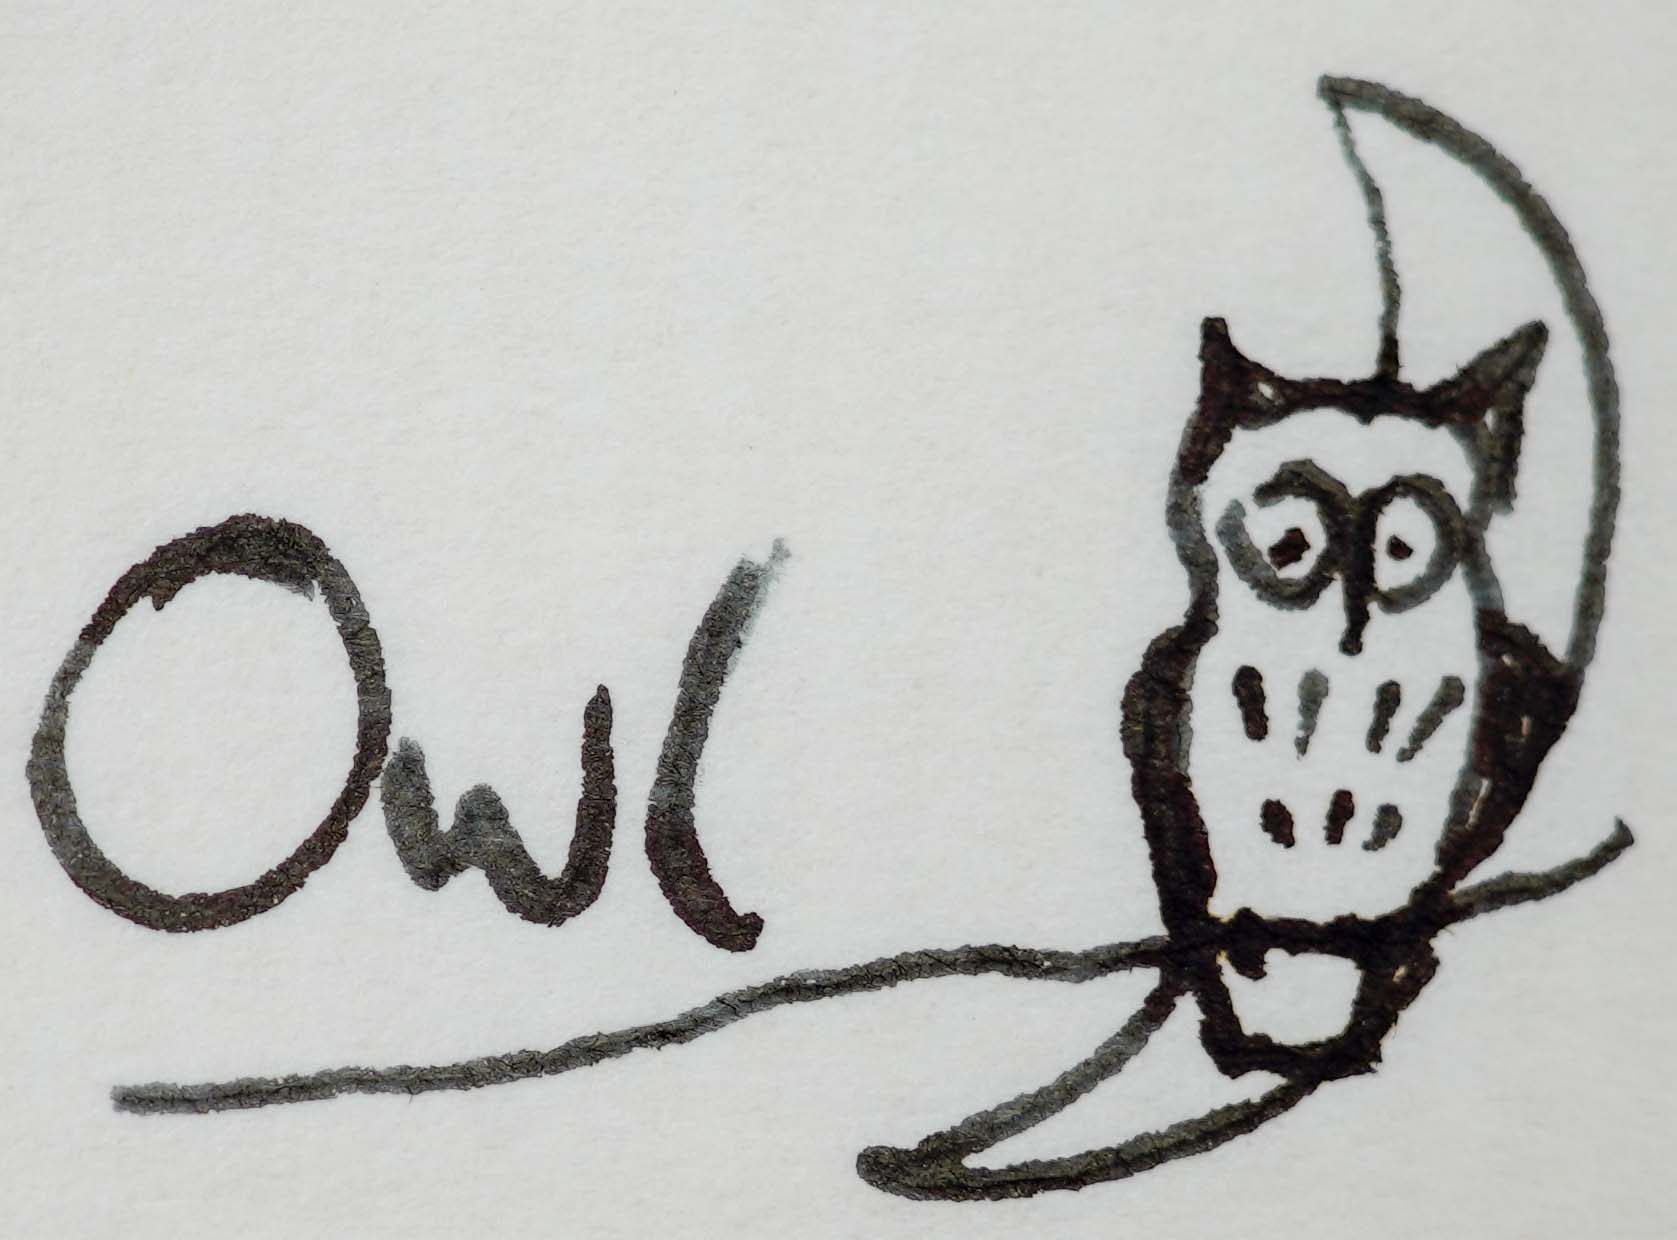 The word Owl written in ink alongside a drawing of an owl sat on the moon by Ted Hughes.